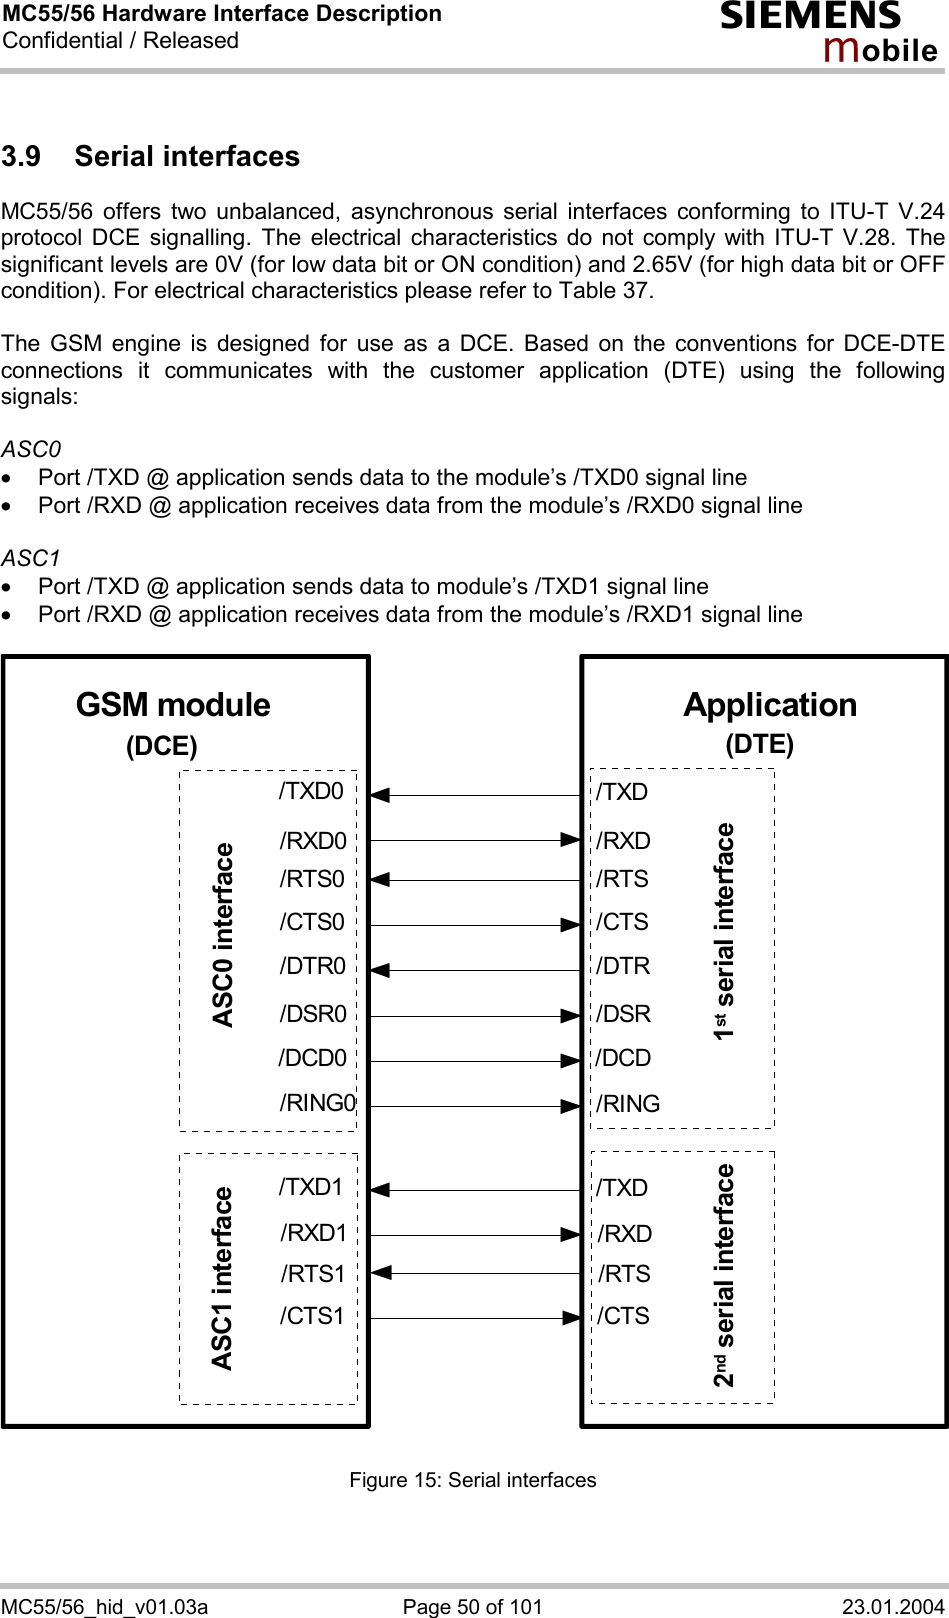 MC55/56 Hardware Interface Description Confidential / Released s mo b i l e MC55/56_hid_v01.03a  Page 50 of 101  23.01.2004 3.9 Serial interfaces MC55/56 offers two unbalanced, asynchronous serial interfaces conforming to ITU-T V.24 protocol DCE signalling. The electrical characteristics do not comply with ITU-T V.28. The significant levels are 0V (for low data bit or ON condition) and 2.65V (for high data bit or OFF condition). For electrical characteristics please refer to Table 37.  The GSM engine is designed for use as a DCE. Based on the conventions for DCE-DTE connections it communicates with the customer application (DTE) using the following signals:  ASC0 ·  Port /TXD @ application sends data to the module’s /TXD0 signal line ·  Port /RXD @ application receives data from the module’s /RXD0 signal line  ASC1 ·  Port /TXD @ application sends data to module’s /TXD1 signal line ·  Port /RXD @ application receives data from the module’s /RXD1 signal line  GSM module Application/TXD/RXD/RTS/CTS/RING/DCD/DSR/DTR/TXD/RXD/RTS/CTS1st serial interface(DTE)(DCE)2nd serial interfaceASC0 interfaceASC1 interface/TXD0/RXD0/RTS0/CTS0/RING0/DCD0/DSR0/DTR0/TXD1/RXD1/RTS1/CTS1 Figure 15: Serial interfaces   